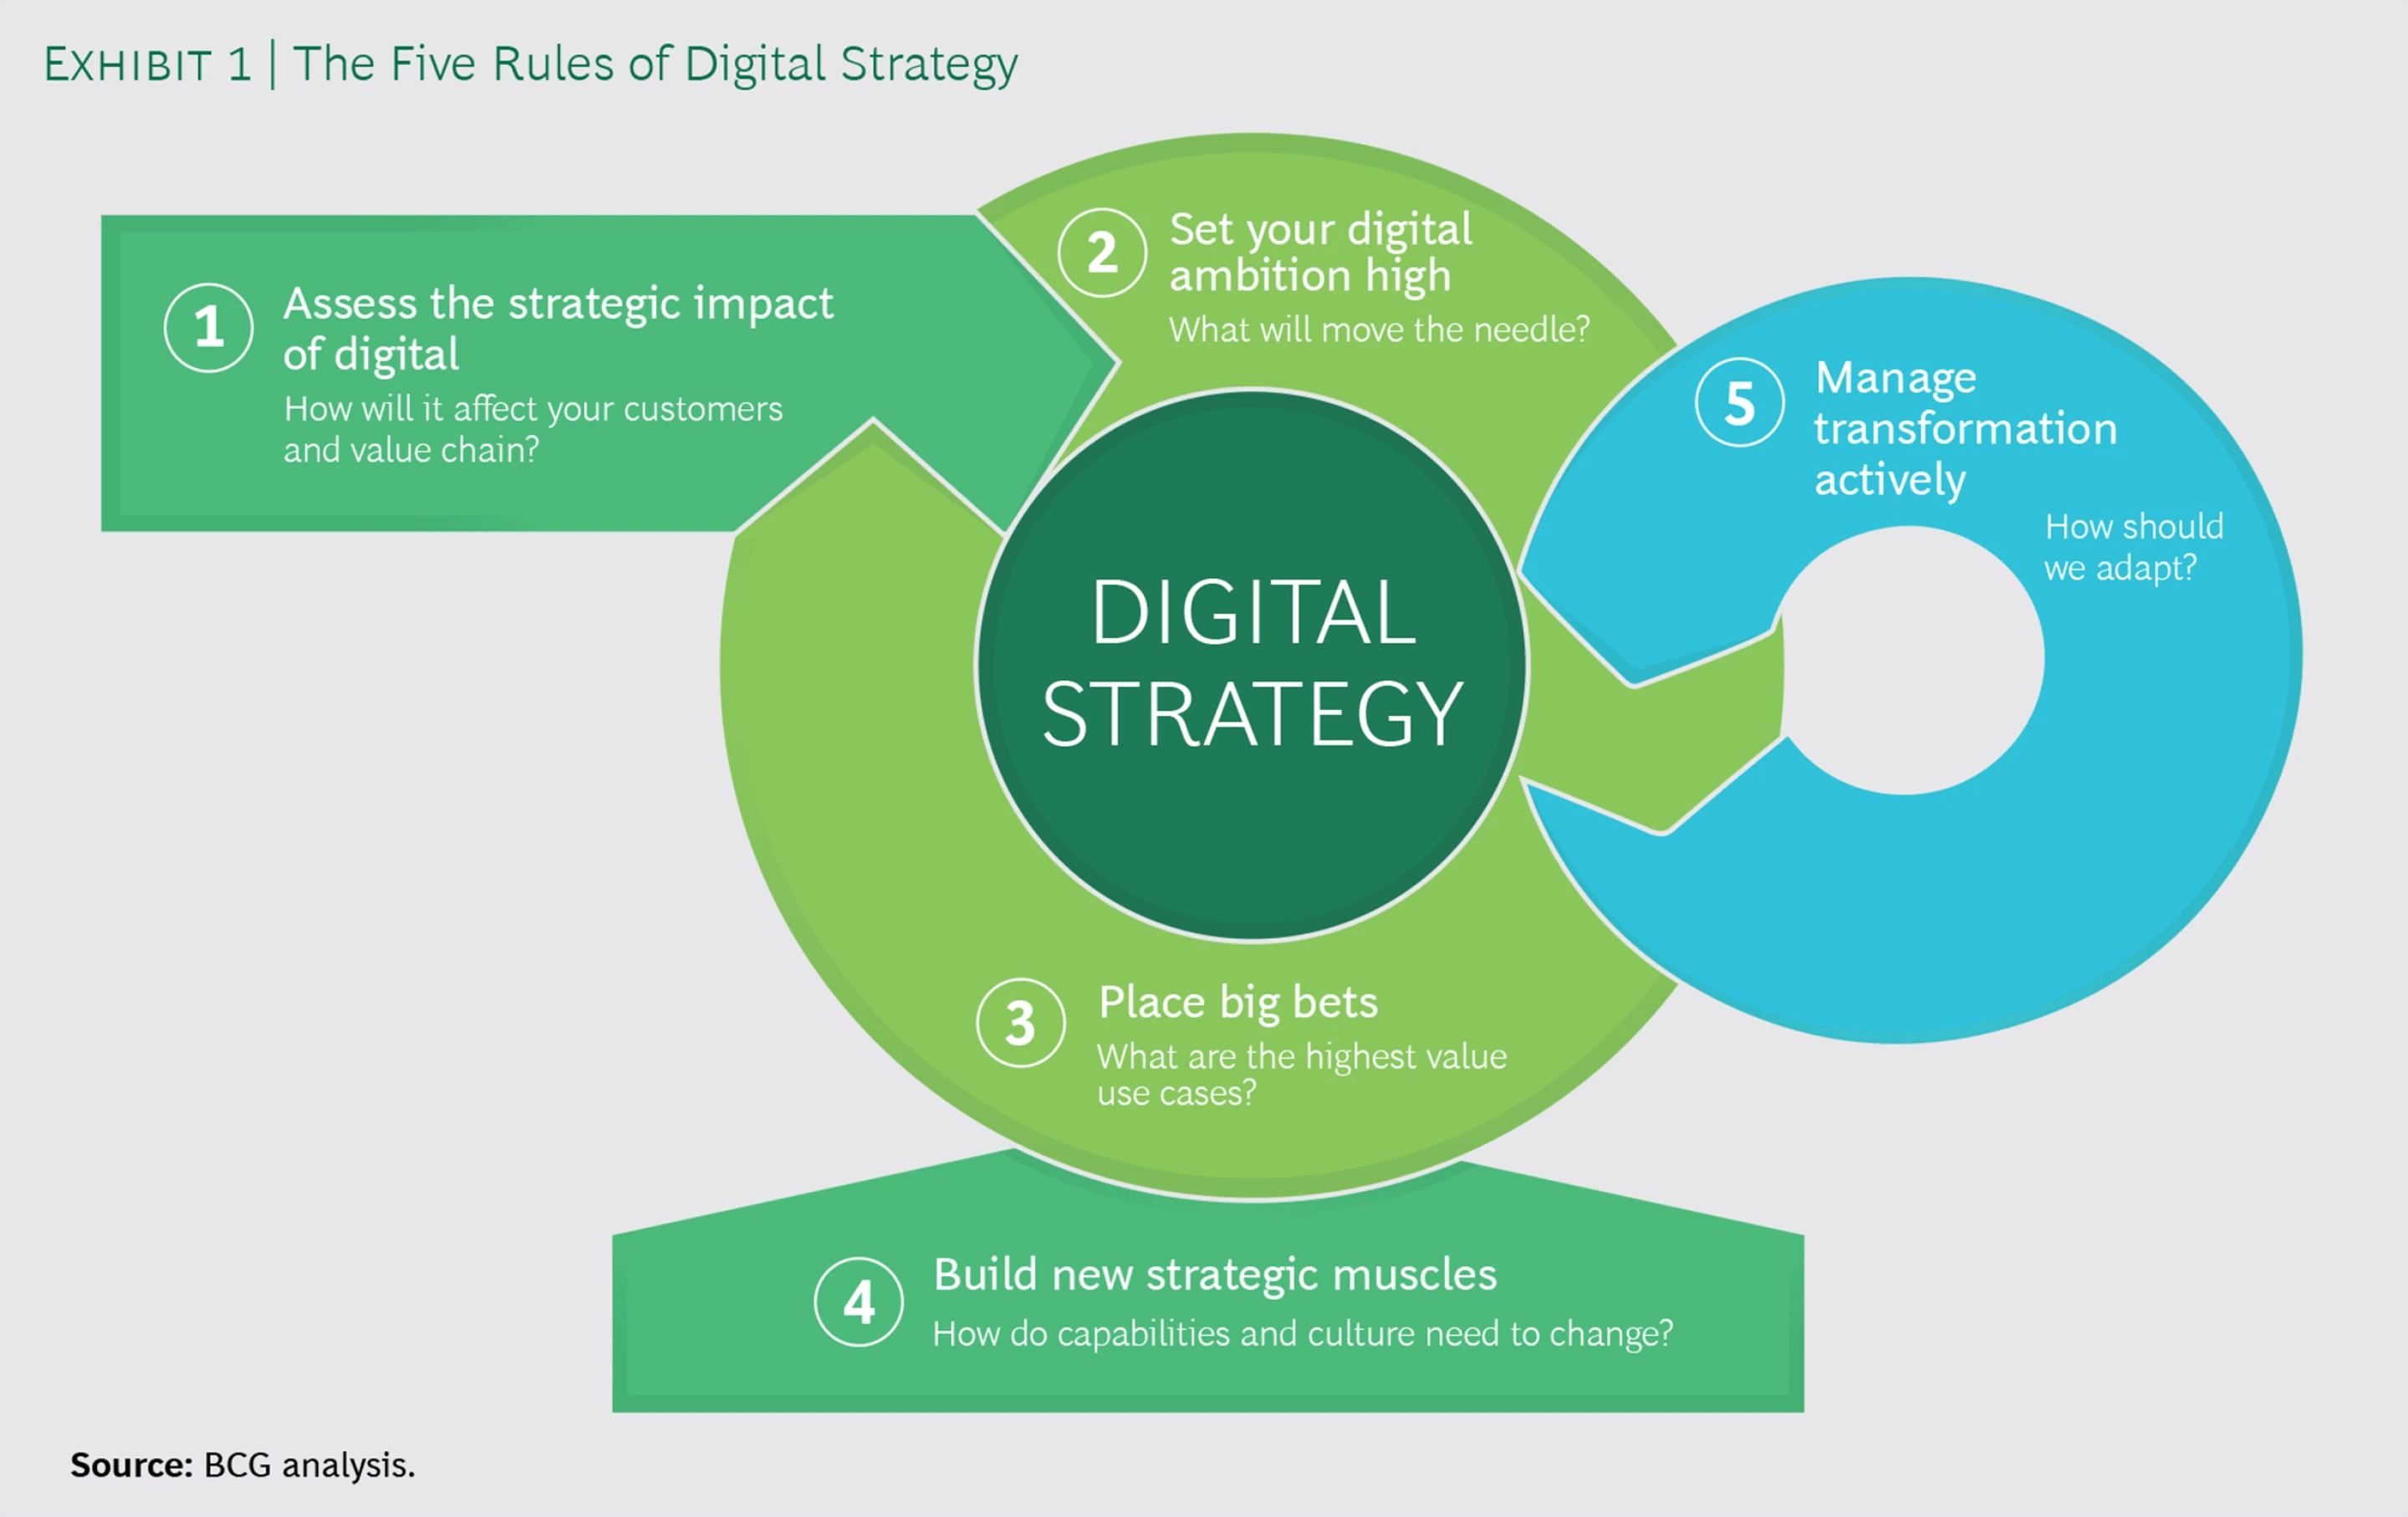 There Are Four Paths To Digital Transformation, Each With Its Own Challenges